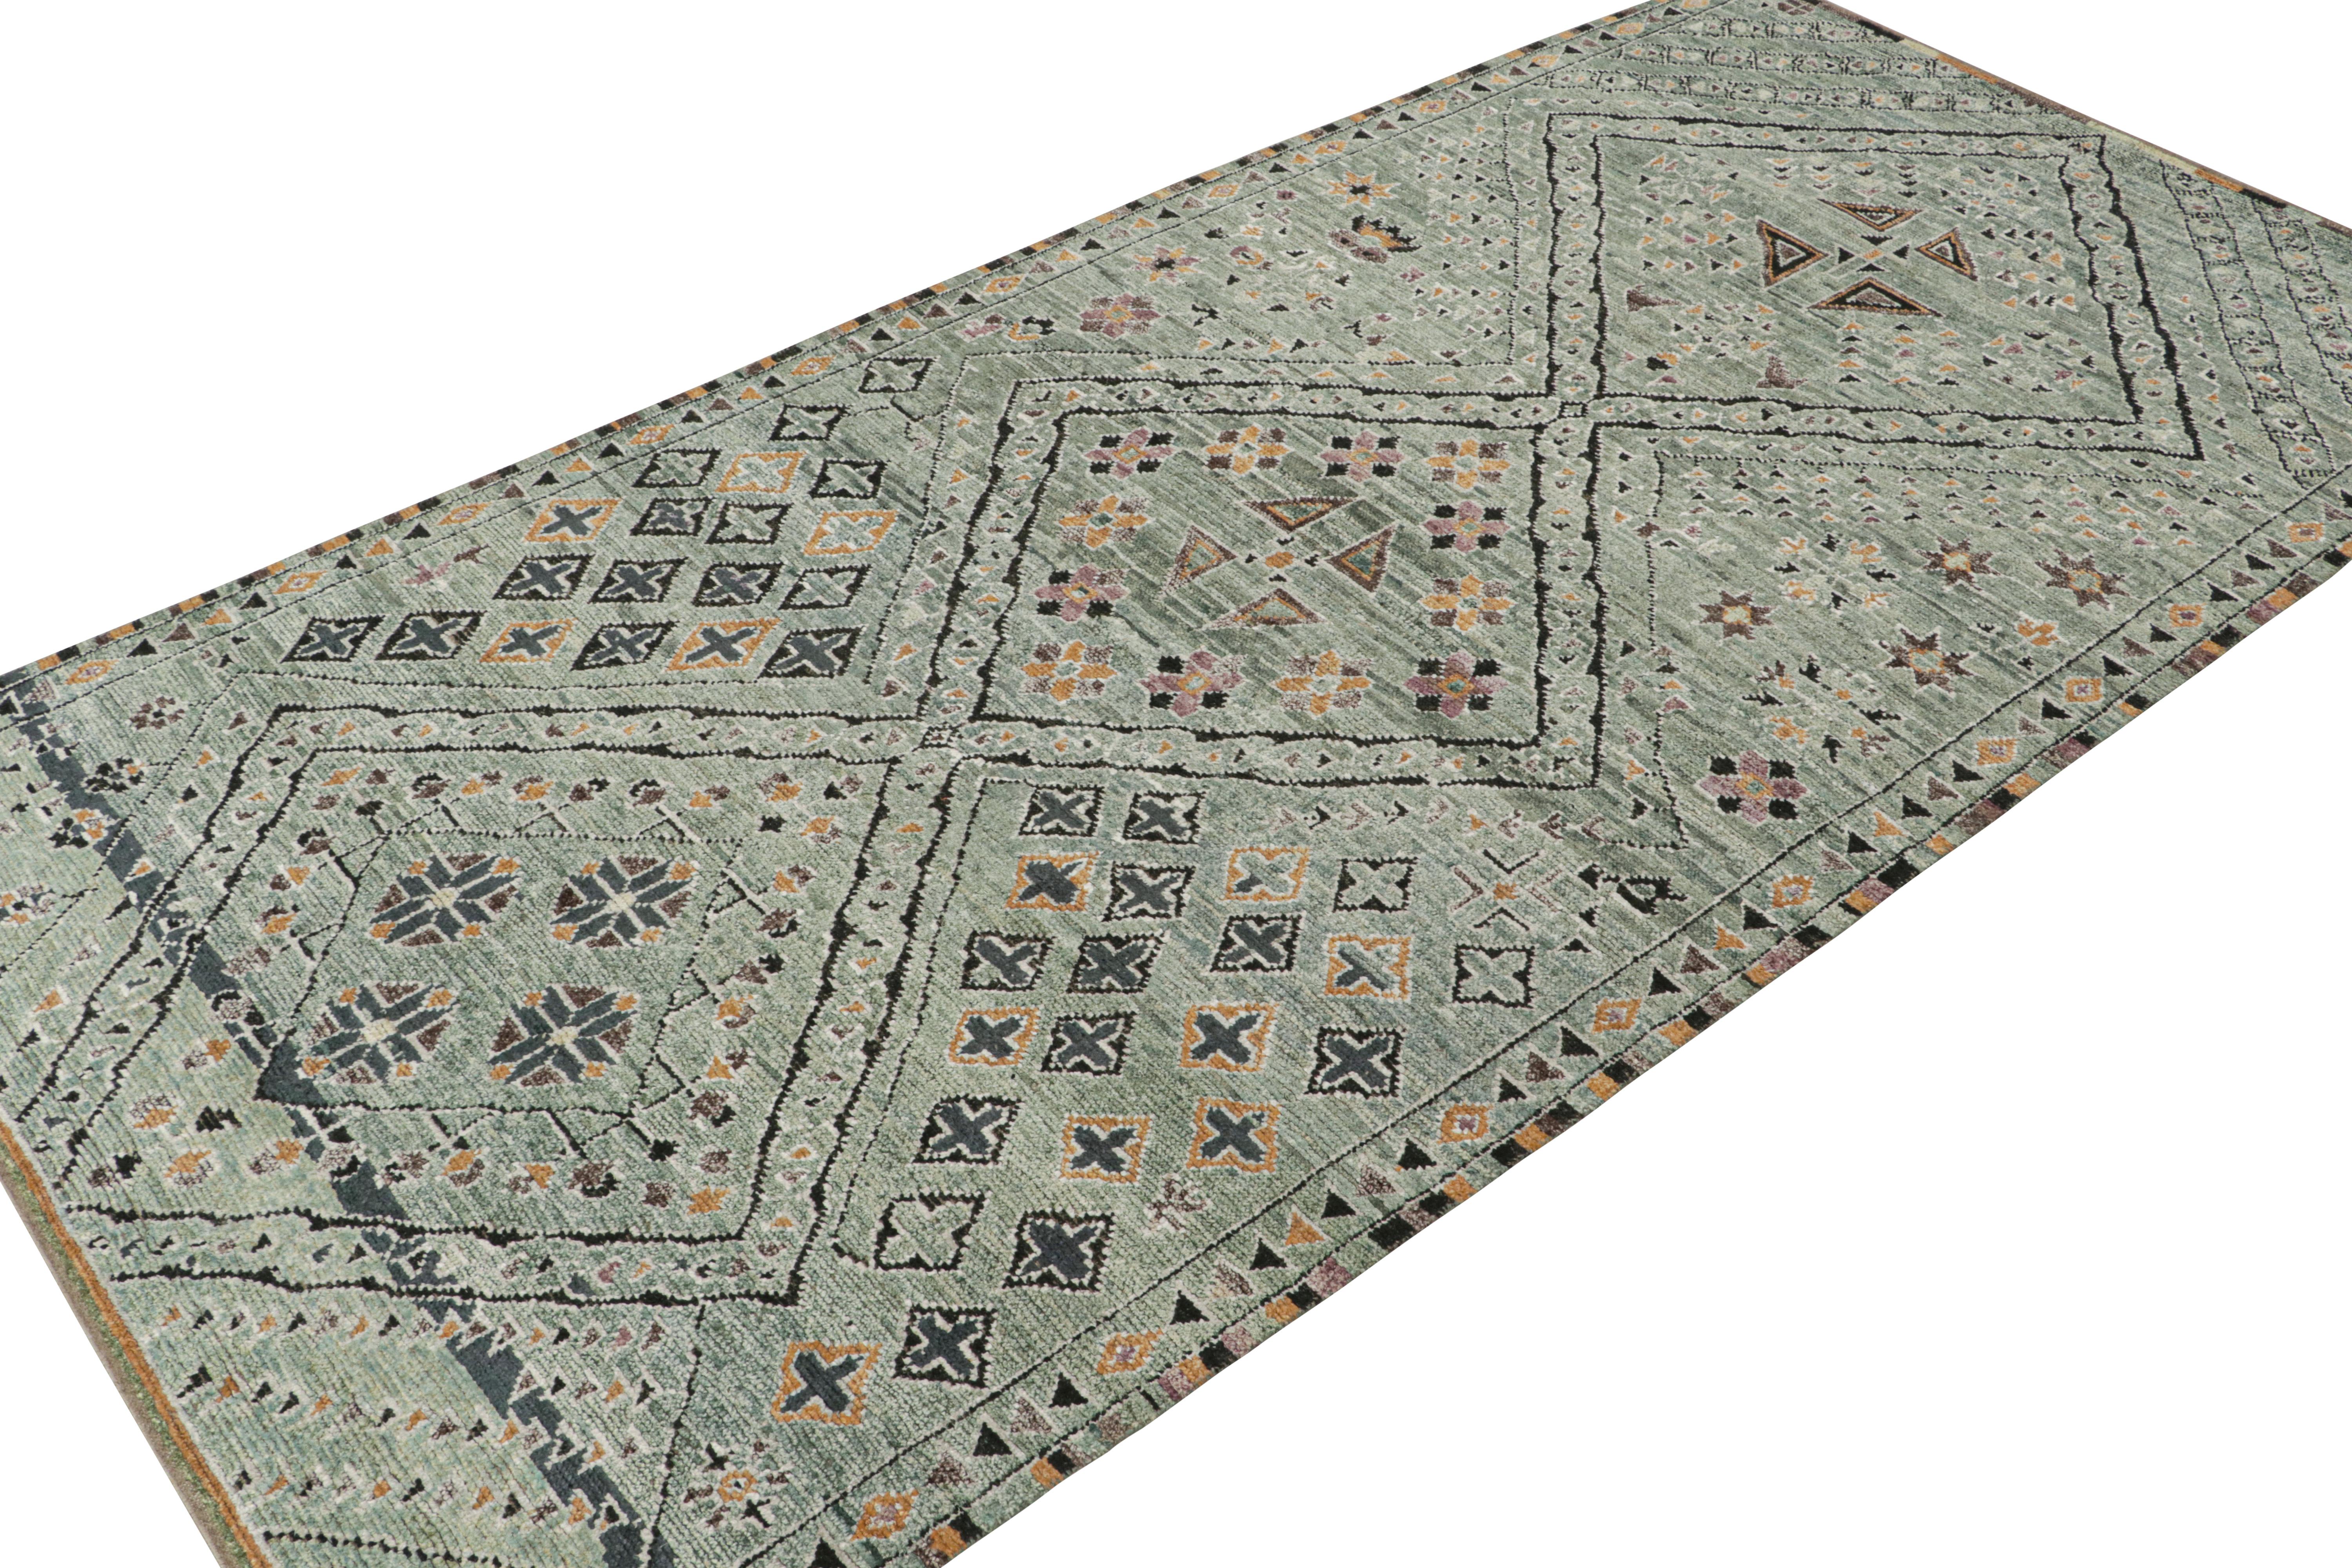 Tribal Rug & Kilim’s Moroccan Style Gallery Runner in Teal with Geometric Patterns For Sale